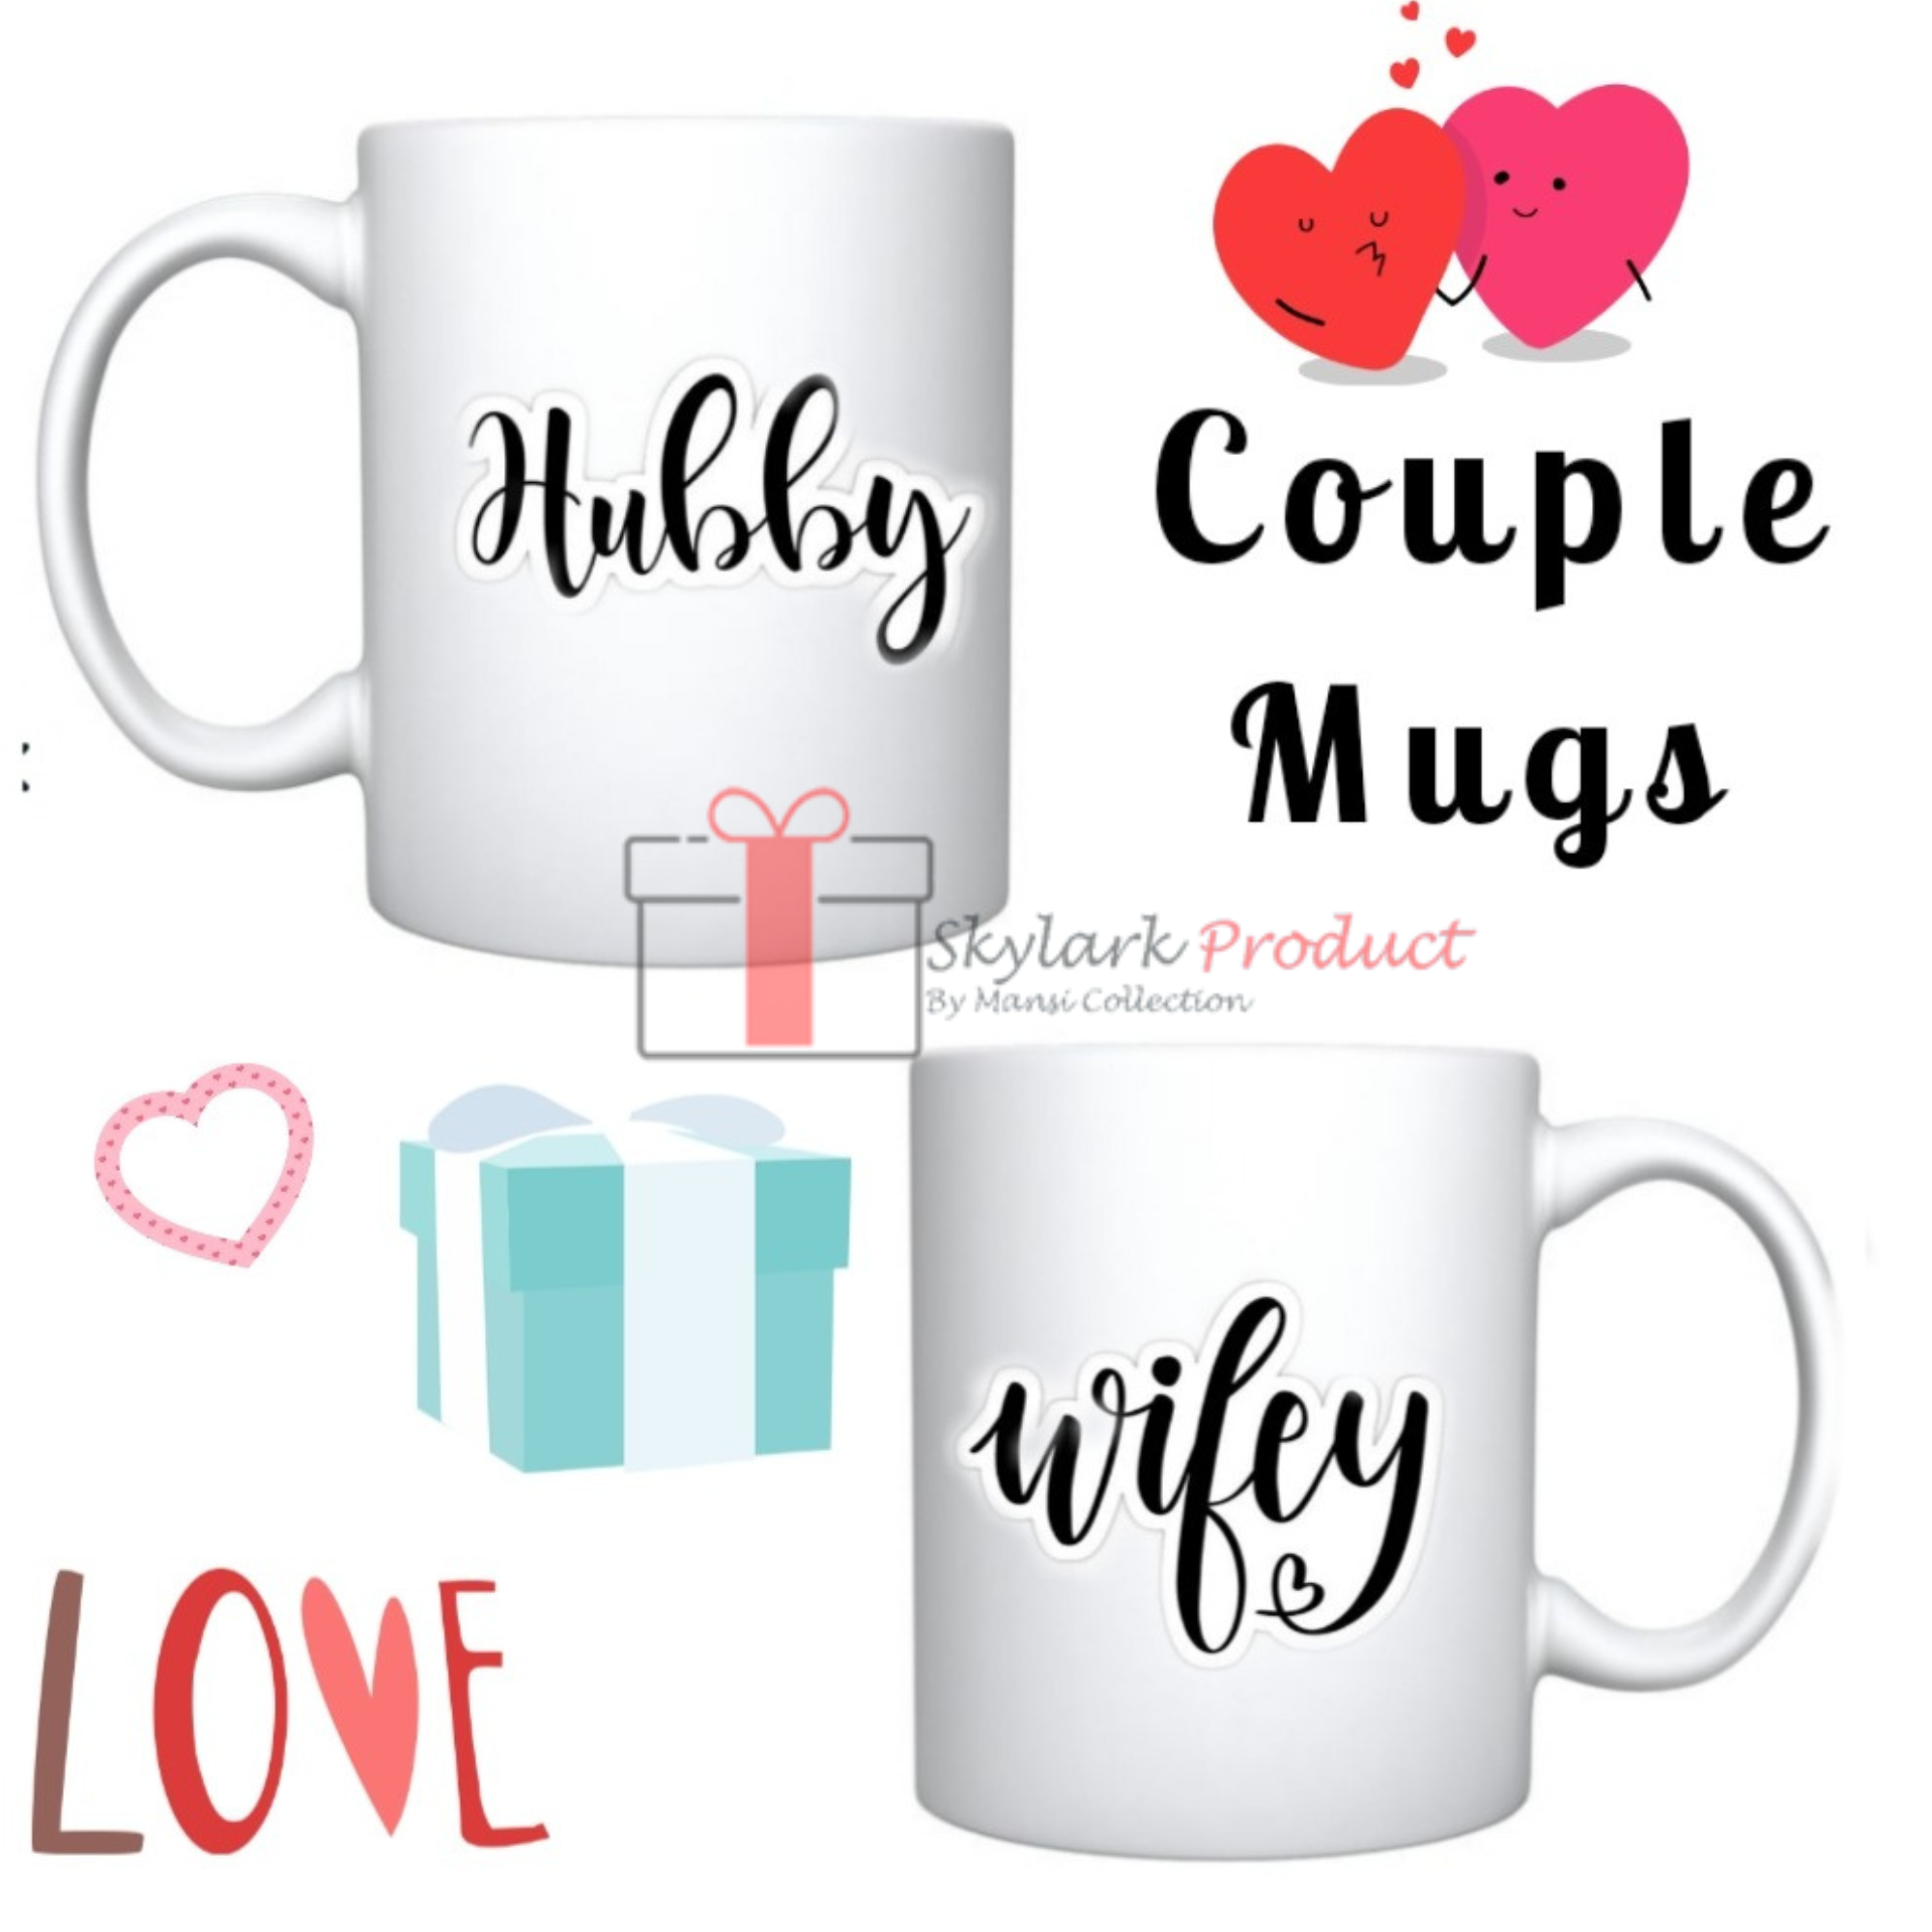 Hubby Wifey Couple Mugs Skylark Product By Mansi Collection